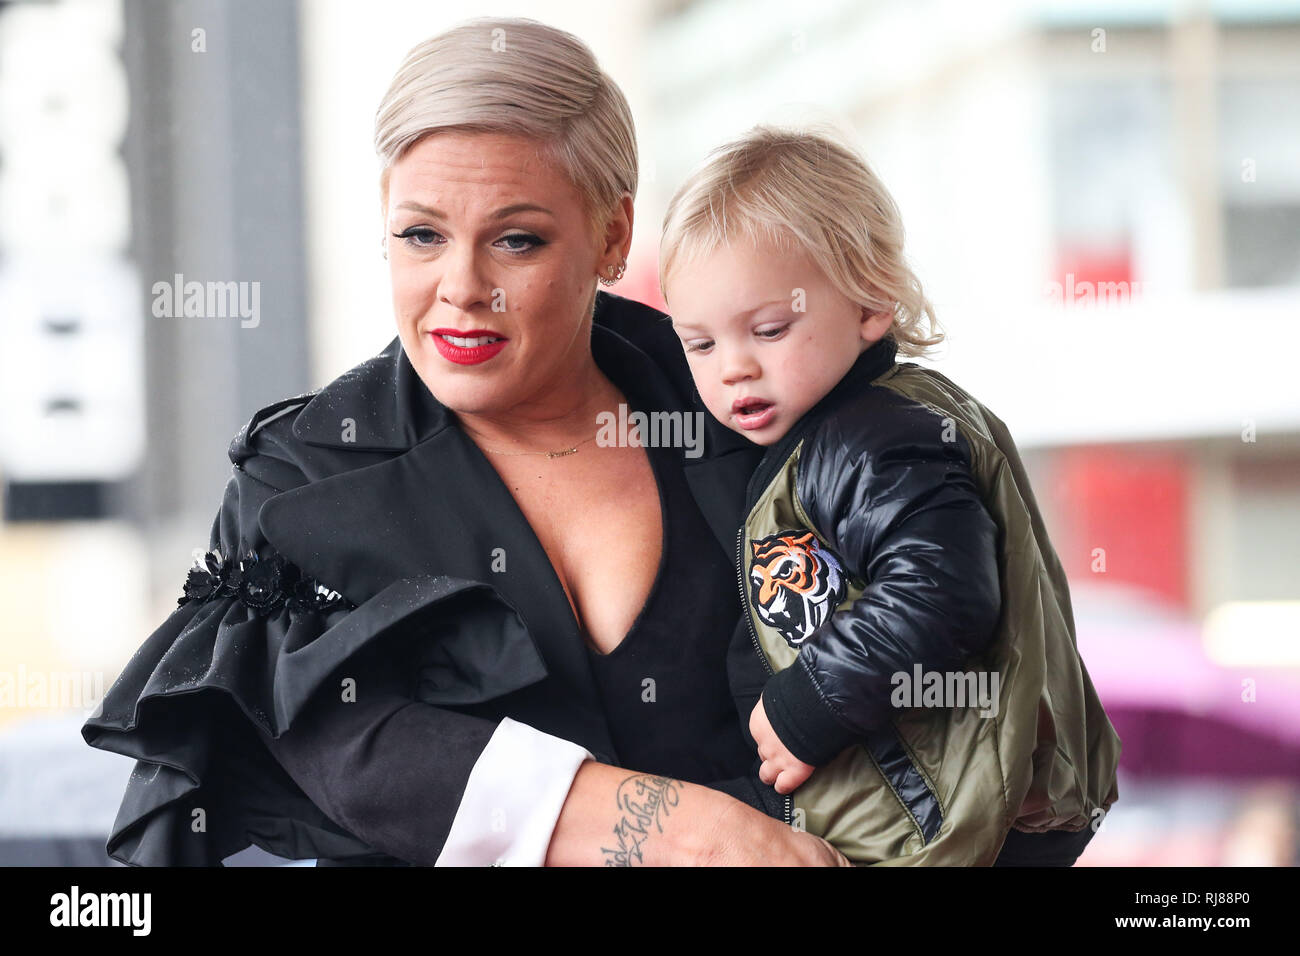 HOLLYWOOD, LOS ANGELES, CA, USA - FEBRUARY 05: Singer P!nk (Pink, Alecia Moore) and son Jameson Moon Hart attend a ceremony honoring her With Star On The Hollywood Walk Of Fame - Dedication of the 2,656th star on the Walk of Fame in the category of Recording on February 5, 2019 in Hollywood, Los Angeles, California, United States. (Photo by Xavier Collin/Image Press Agency) Stock Photo